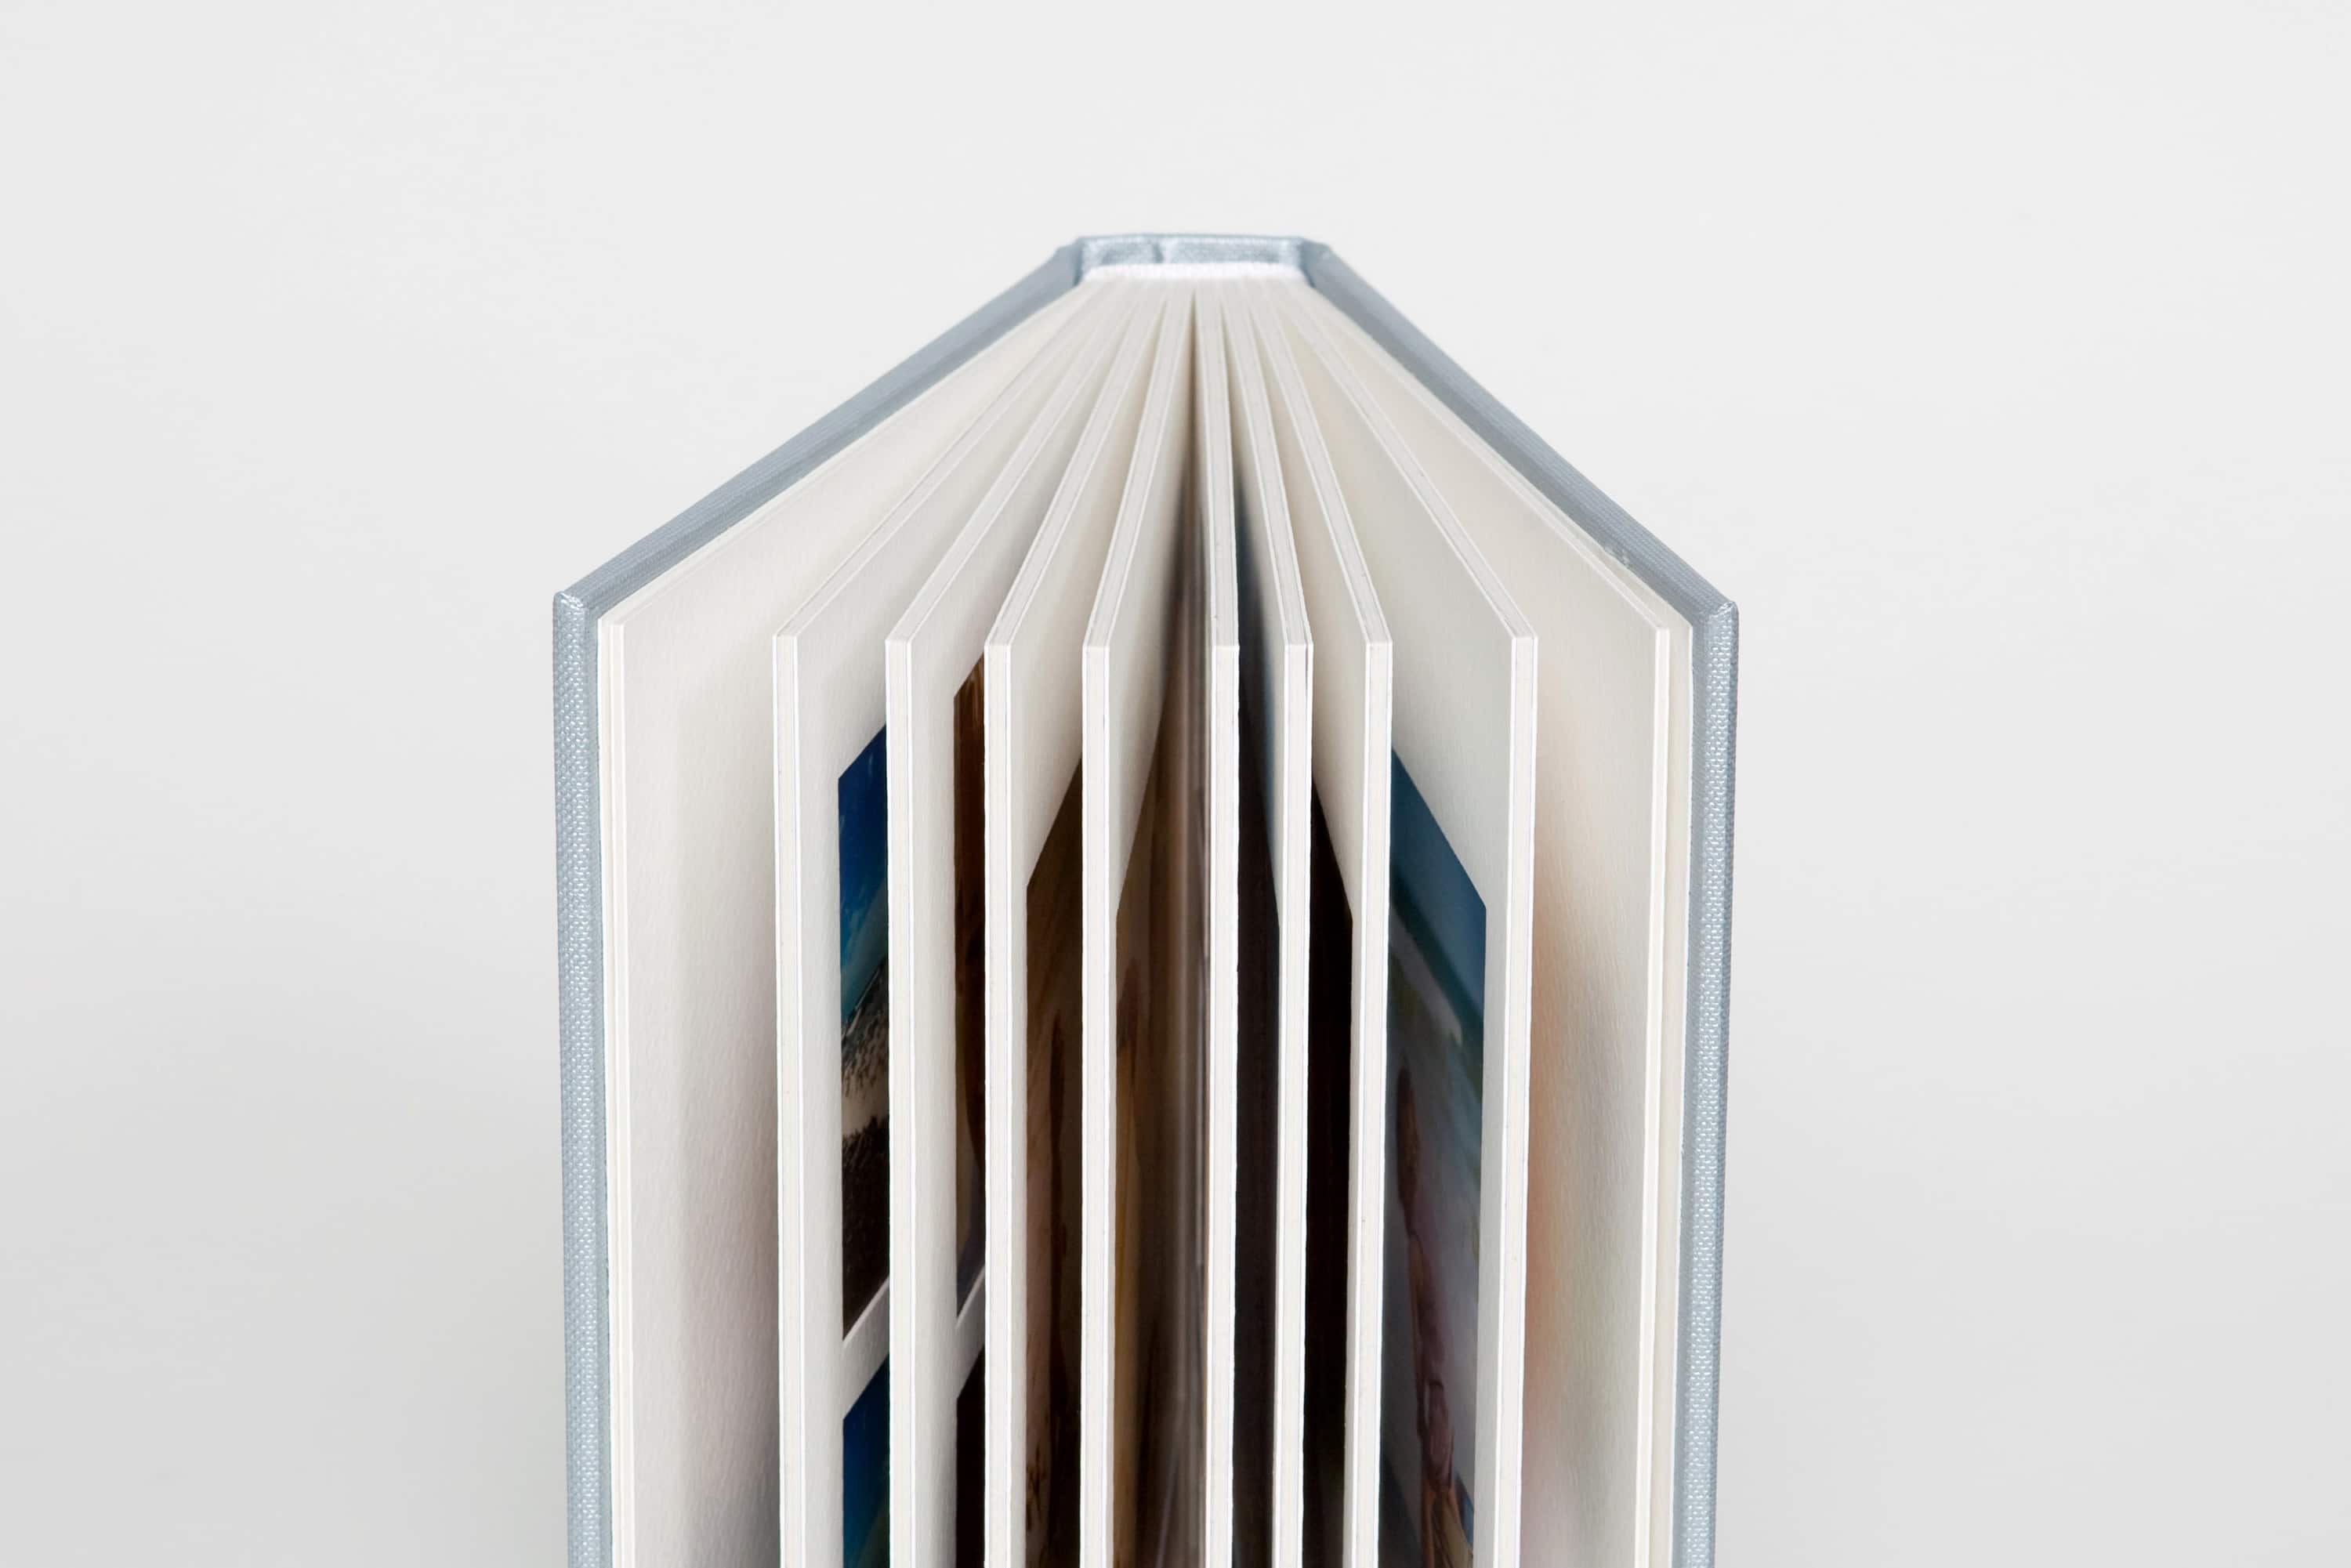 photo showing thickness and form of matted album pages